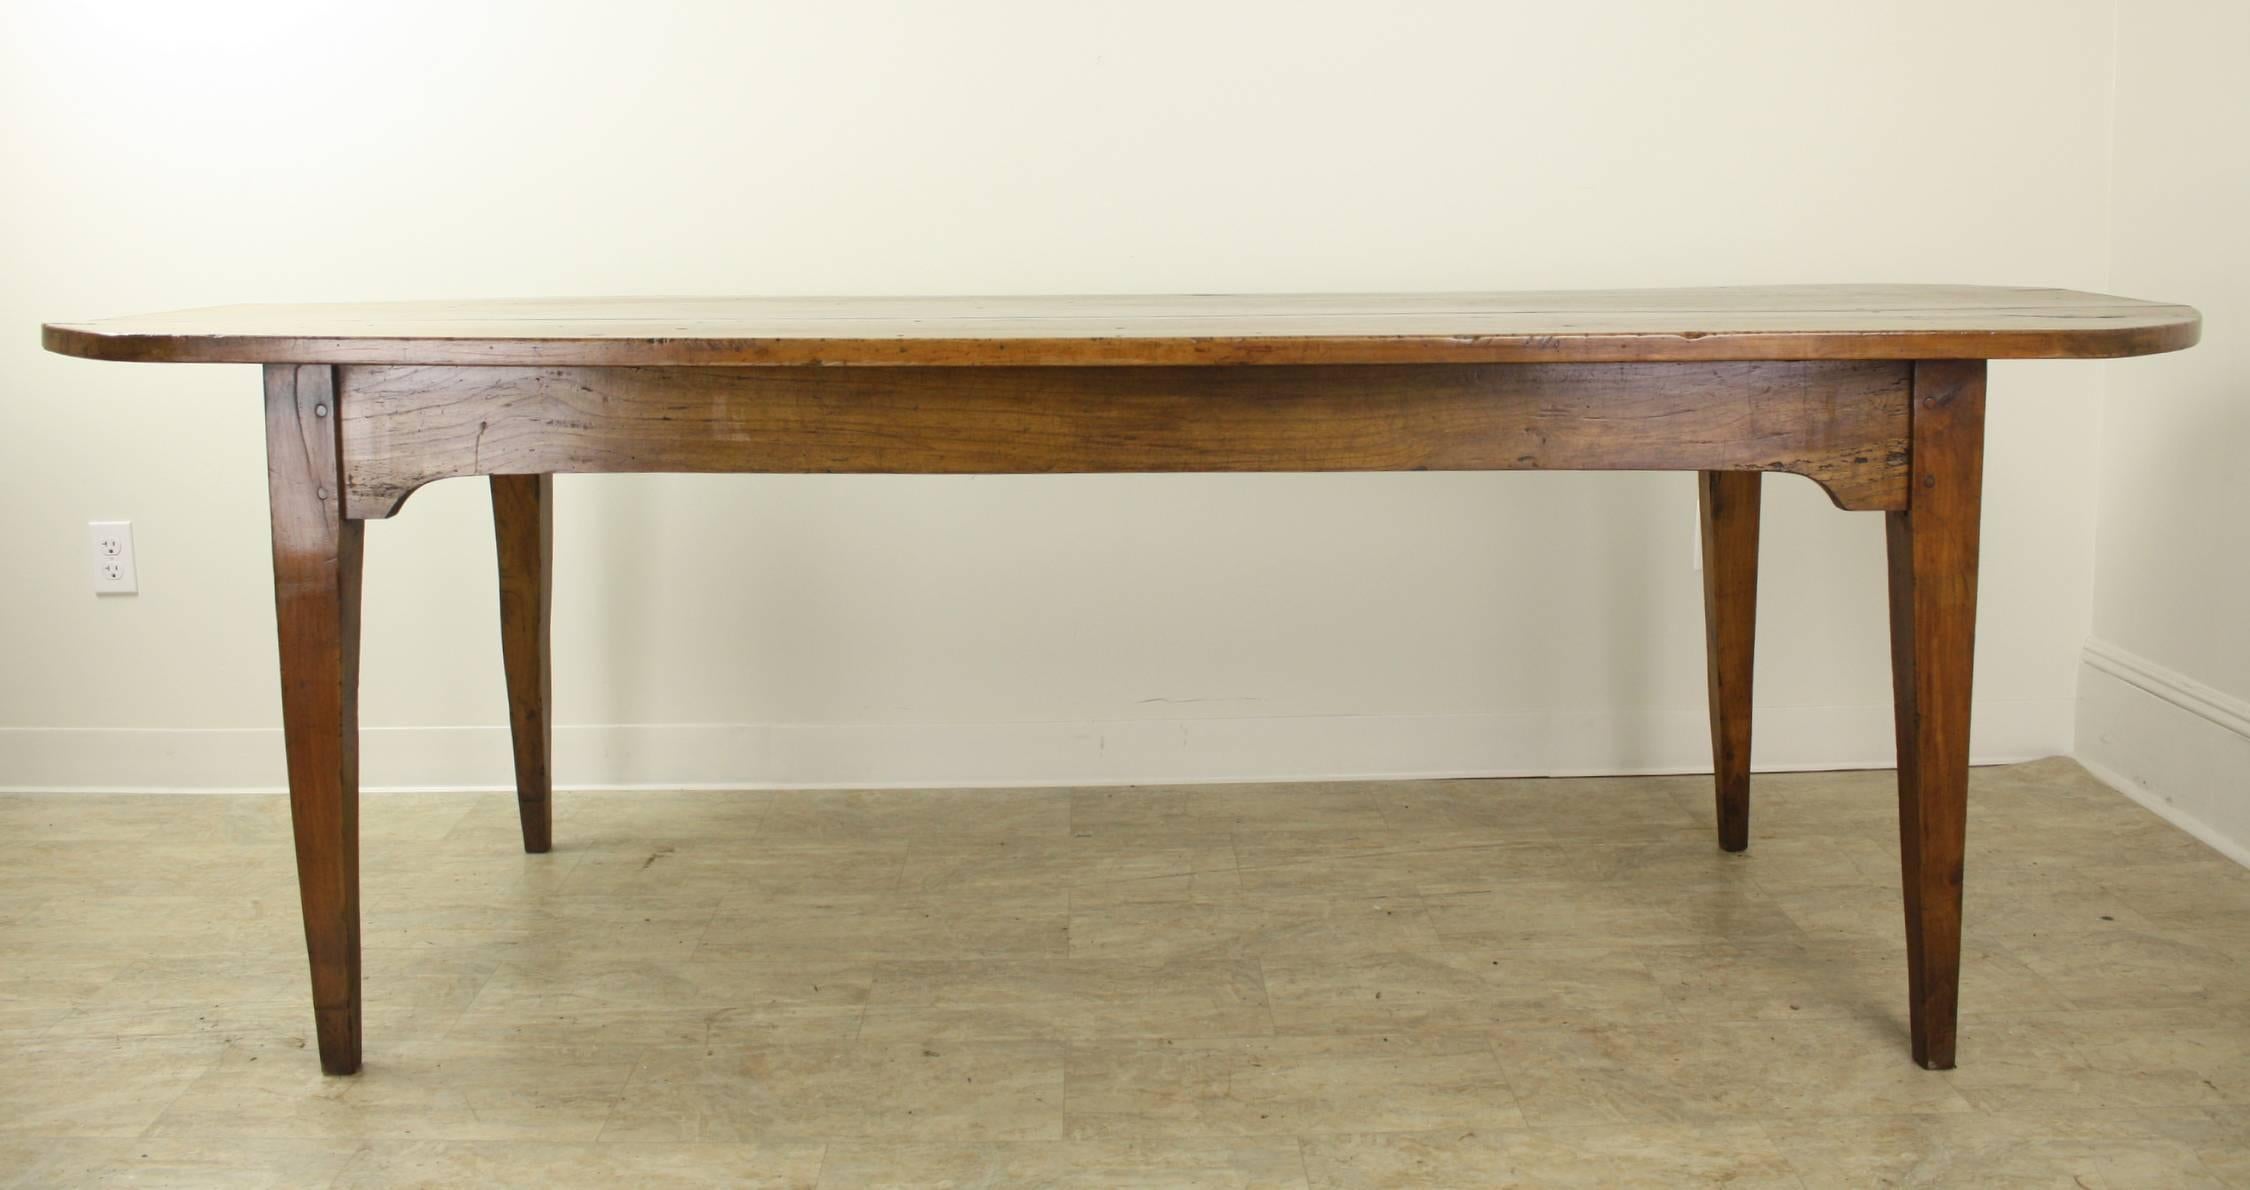 A spectacular long "D-end" farm table with great mellow color and patina. The apple wood has lovely soft graining as well. The "D-end refers to the rounded end of what is basically a rectangular table. This ensures maximum seating.